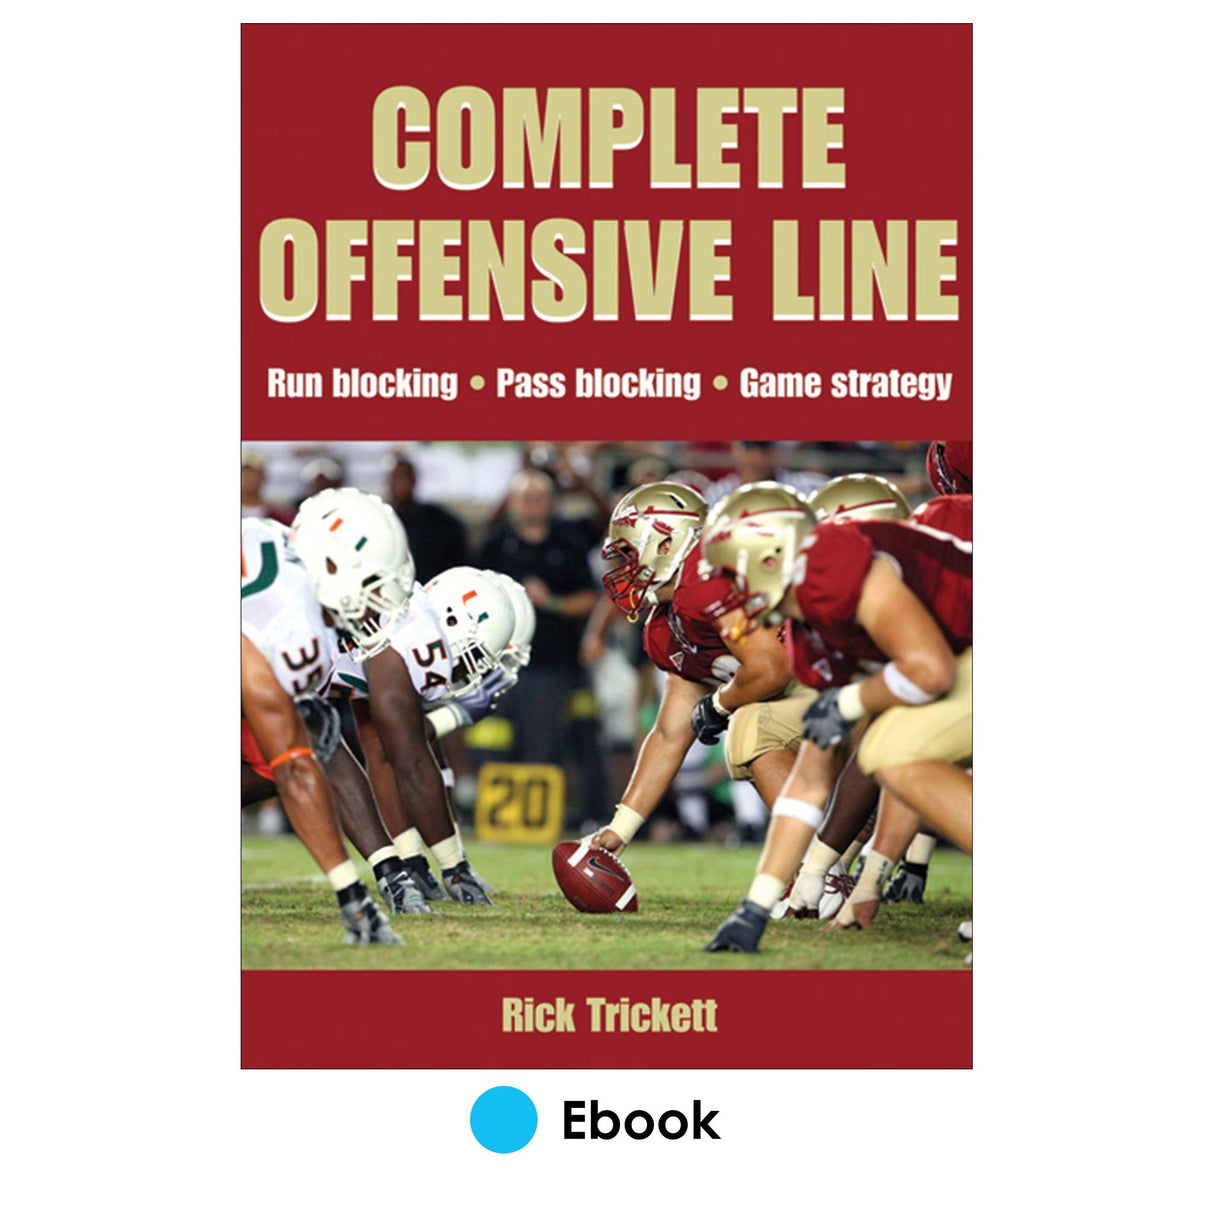 Complete Offensive Line PDF